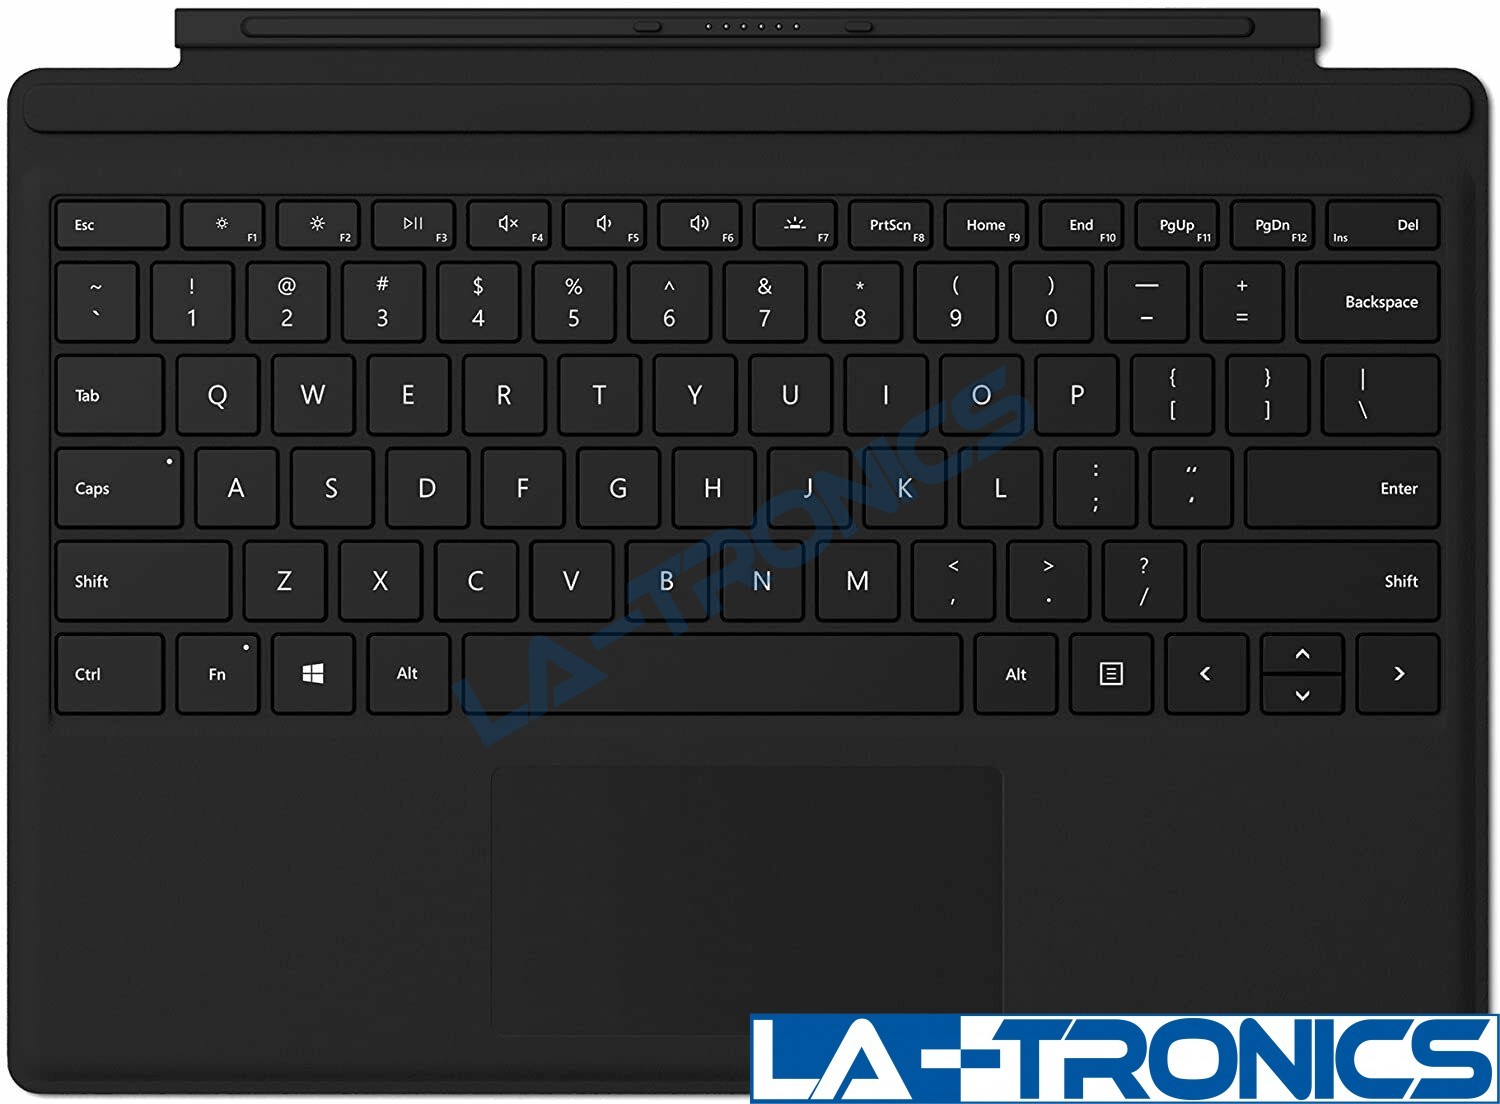 Microsoft Surface Pro 3 4 5 6 7 Type Cover Keyboard Model 1725 FMM-00001 NEW